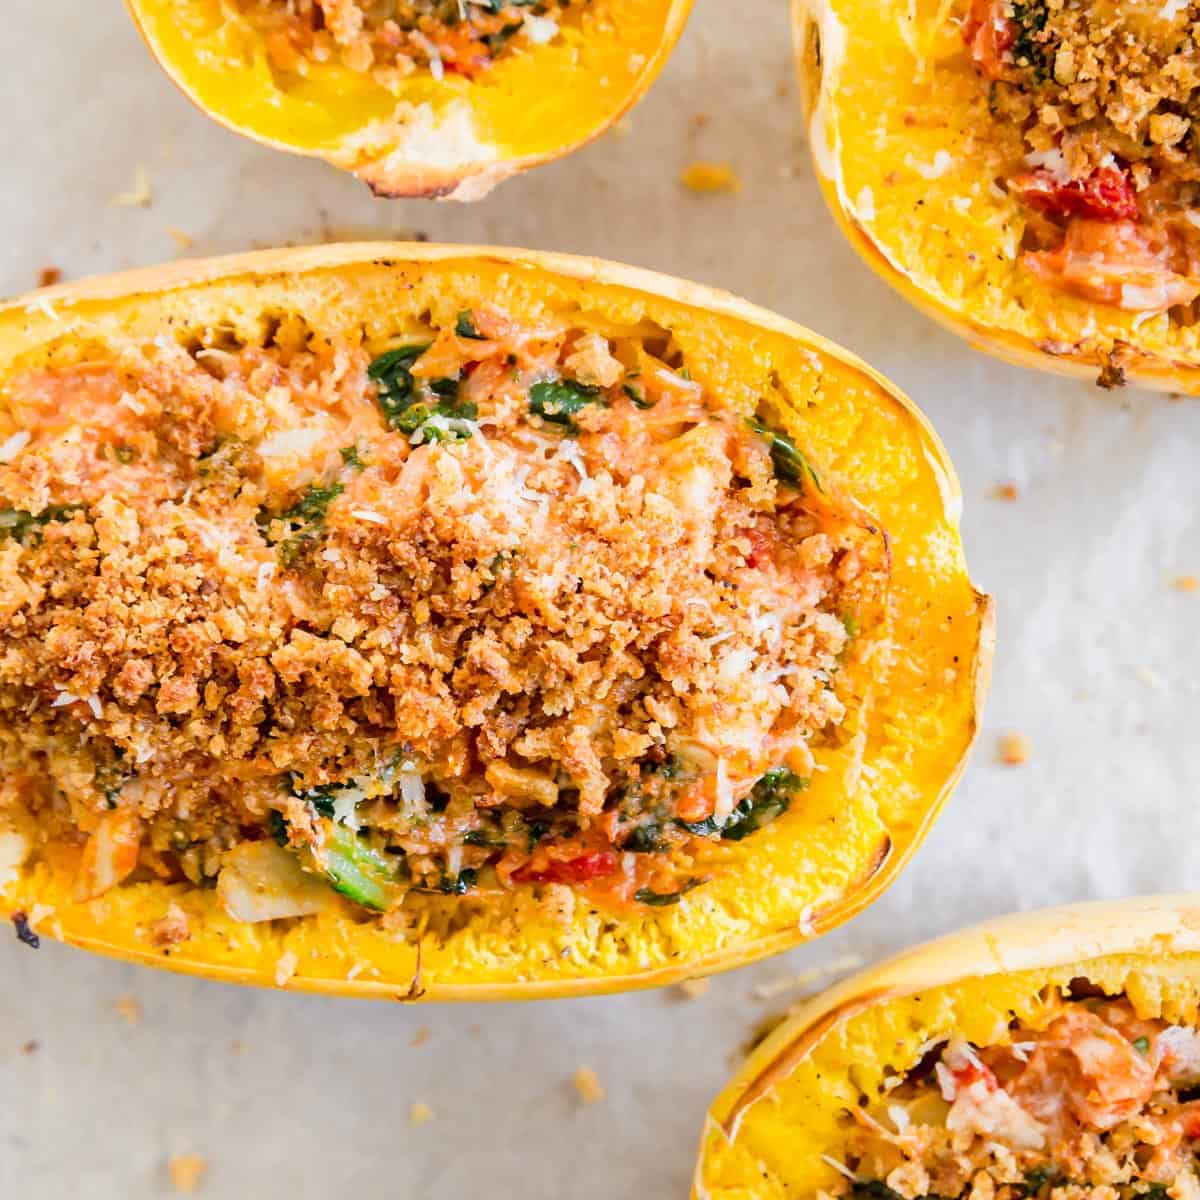 Twice baked spaghetti squash is a cozy and decadent yet low-carb and gluten-free side dish or meatless main course